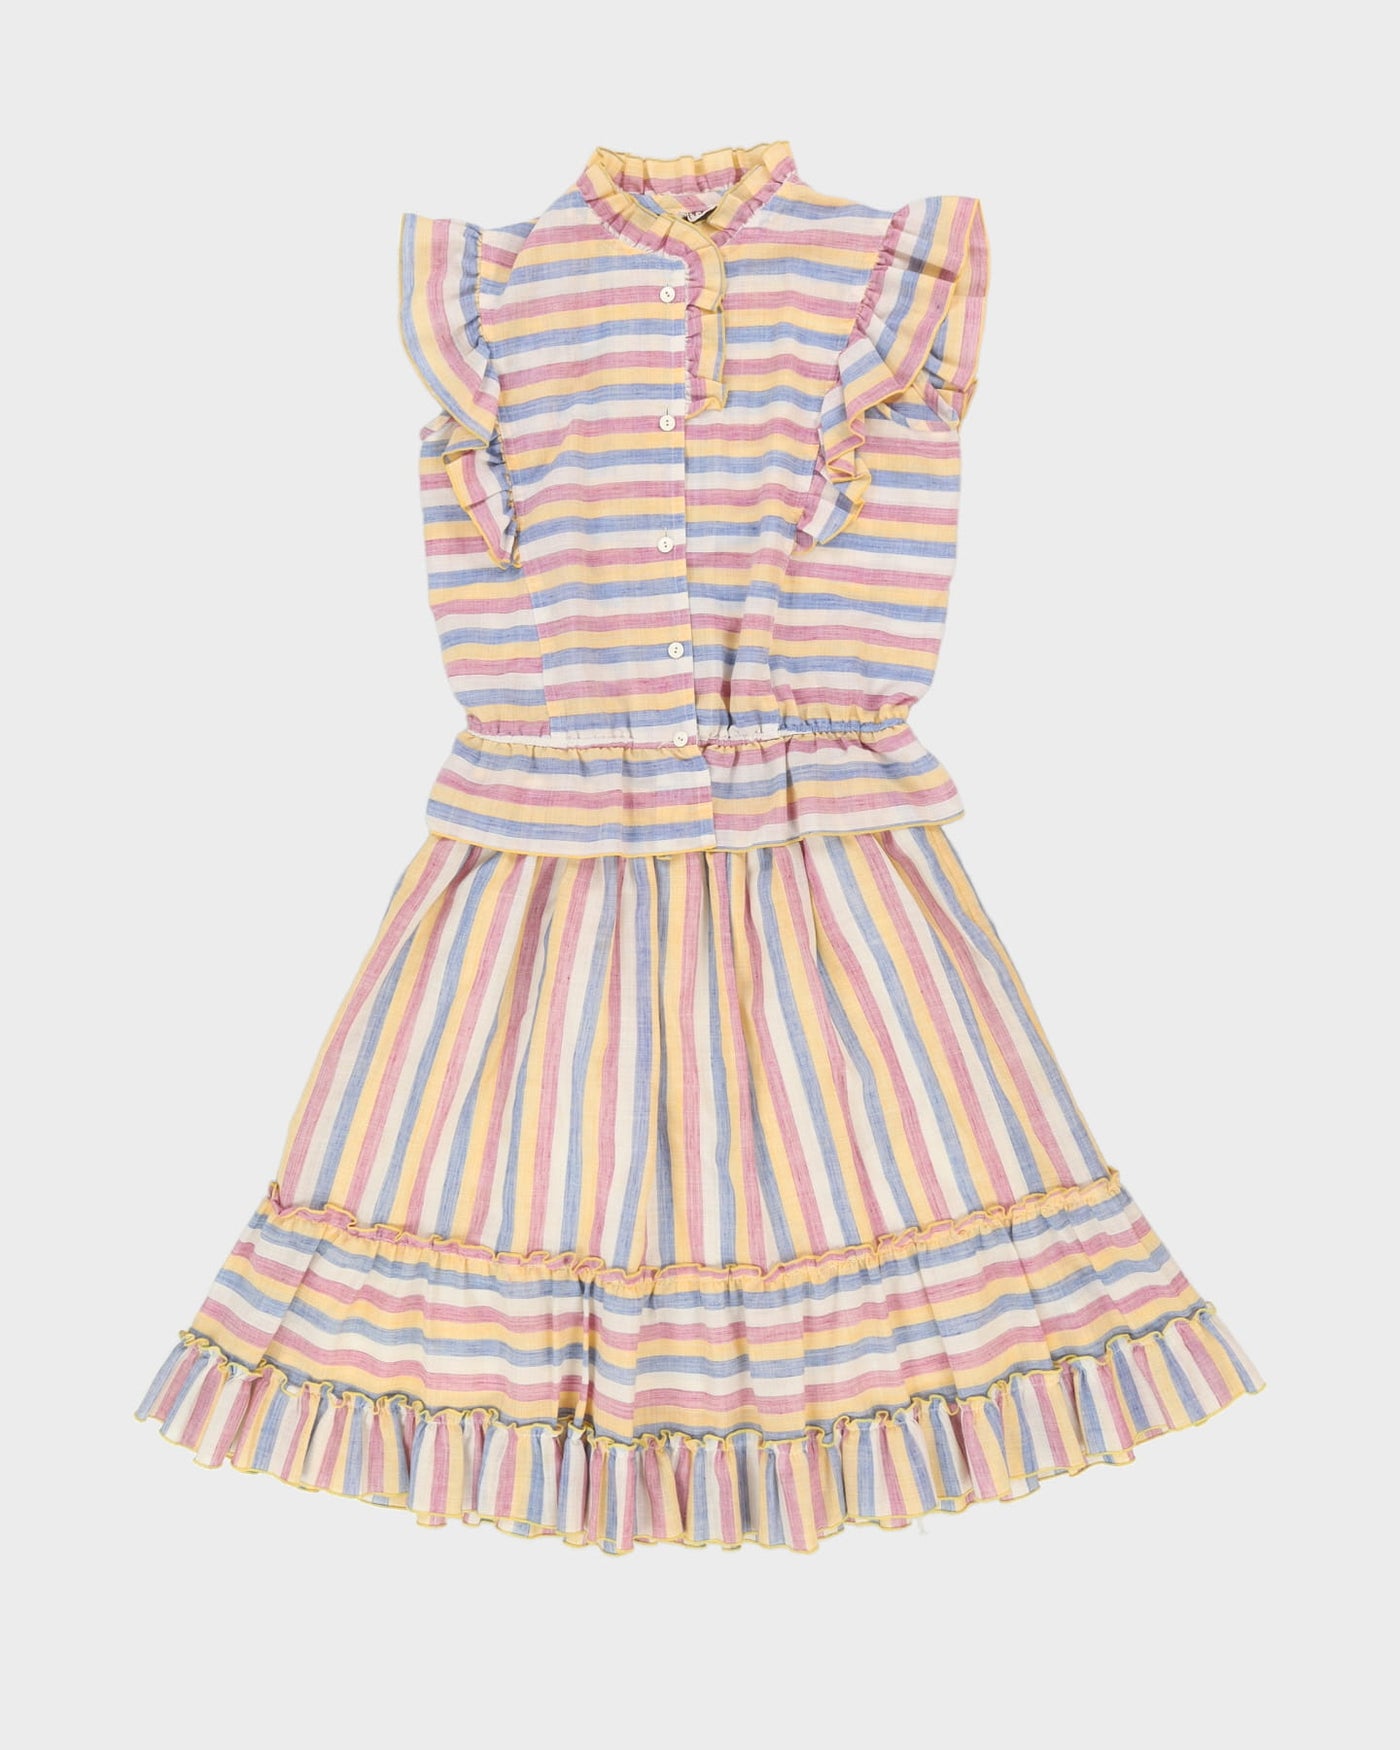 Vintage 1990s Pastel Striped Top and Skirt Set - XS / S